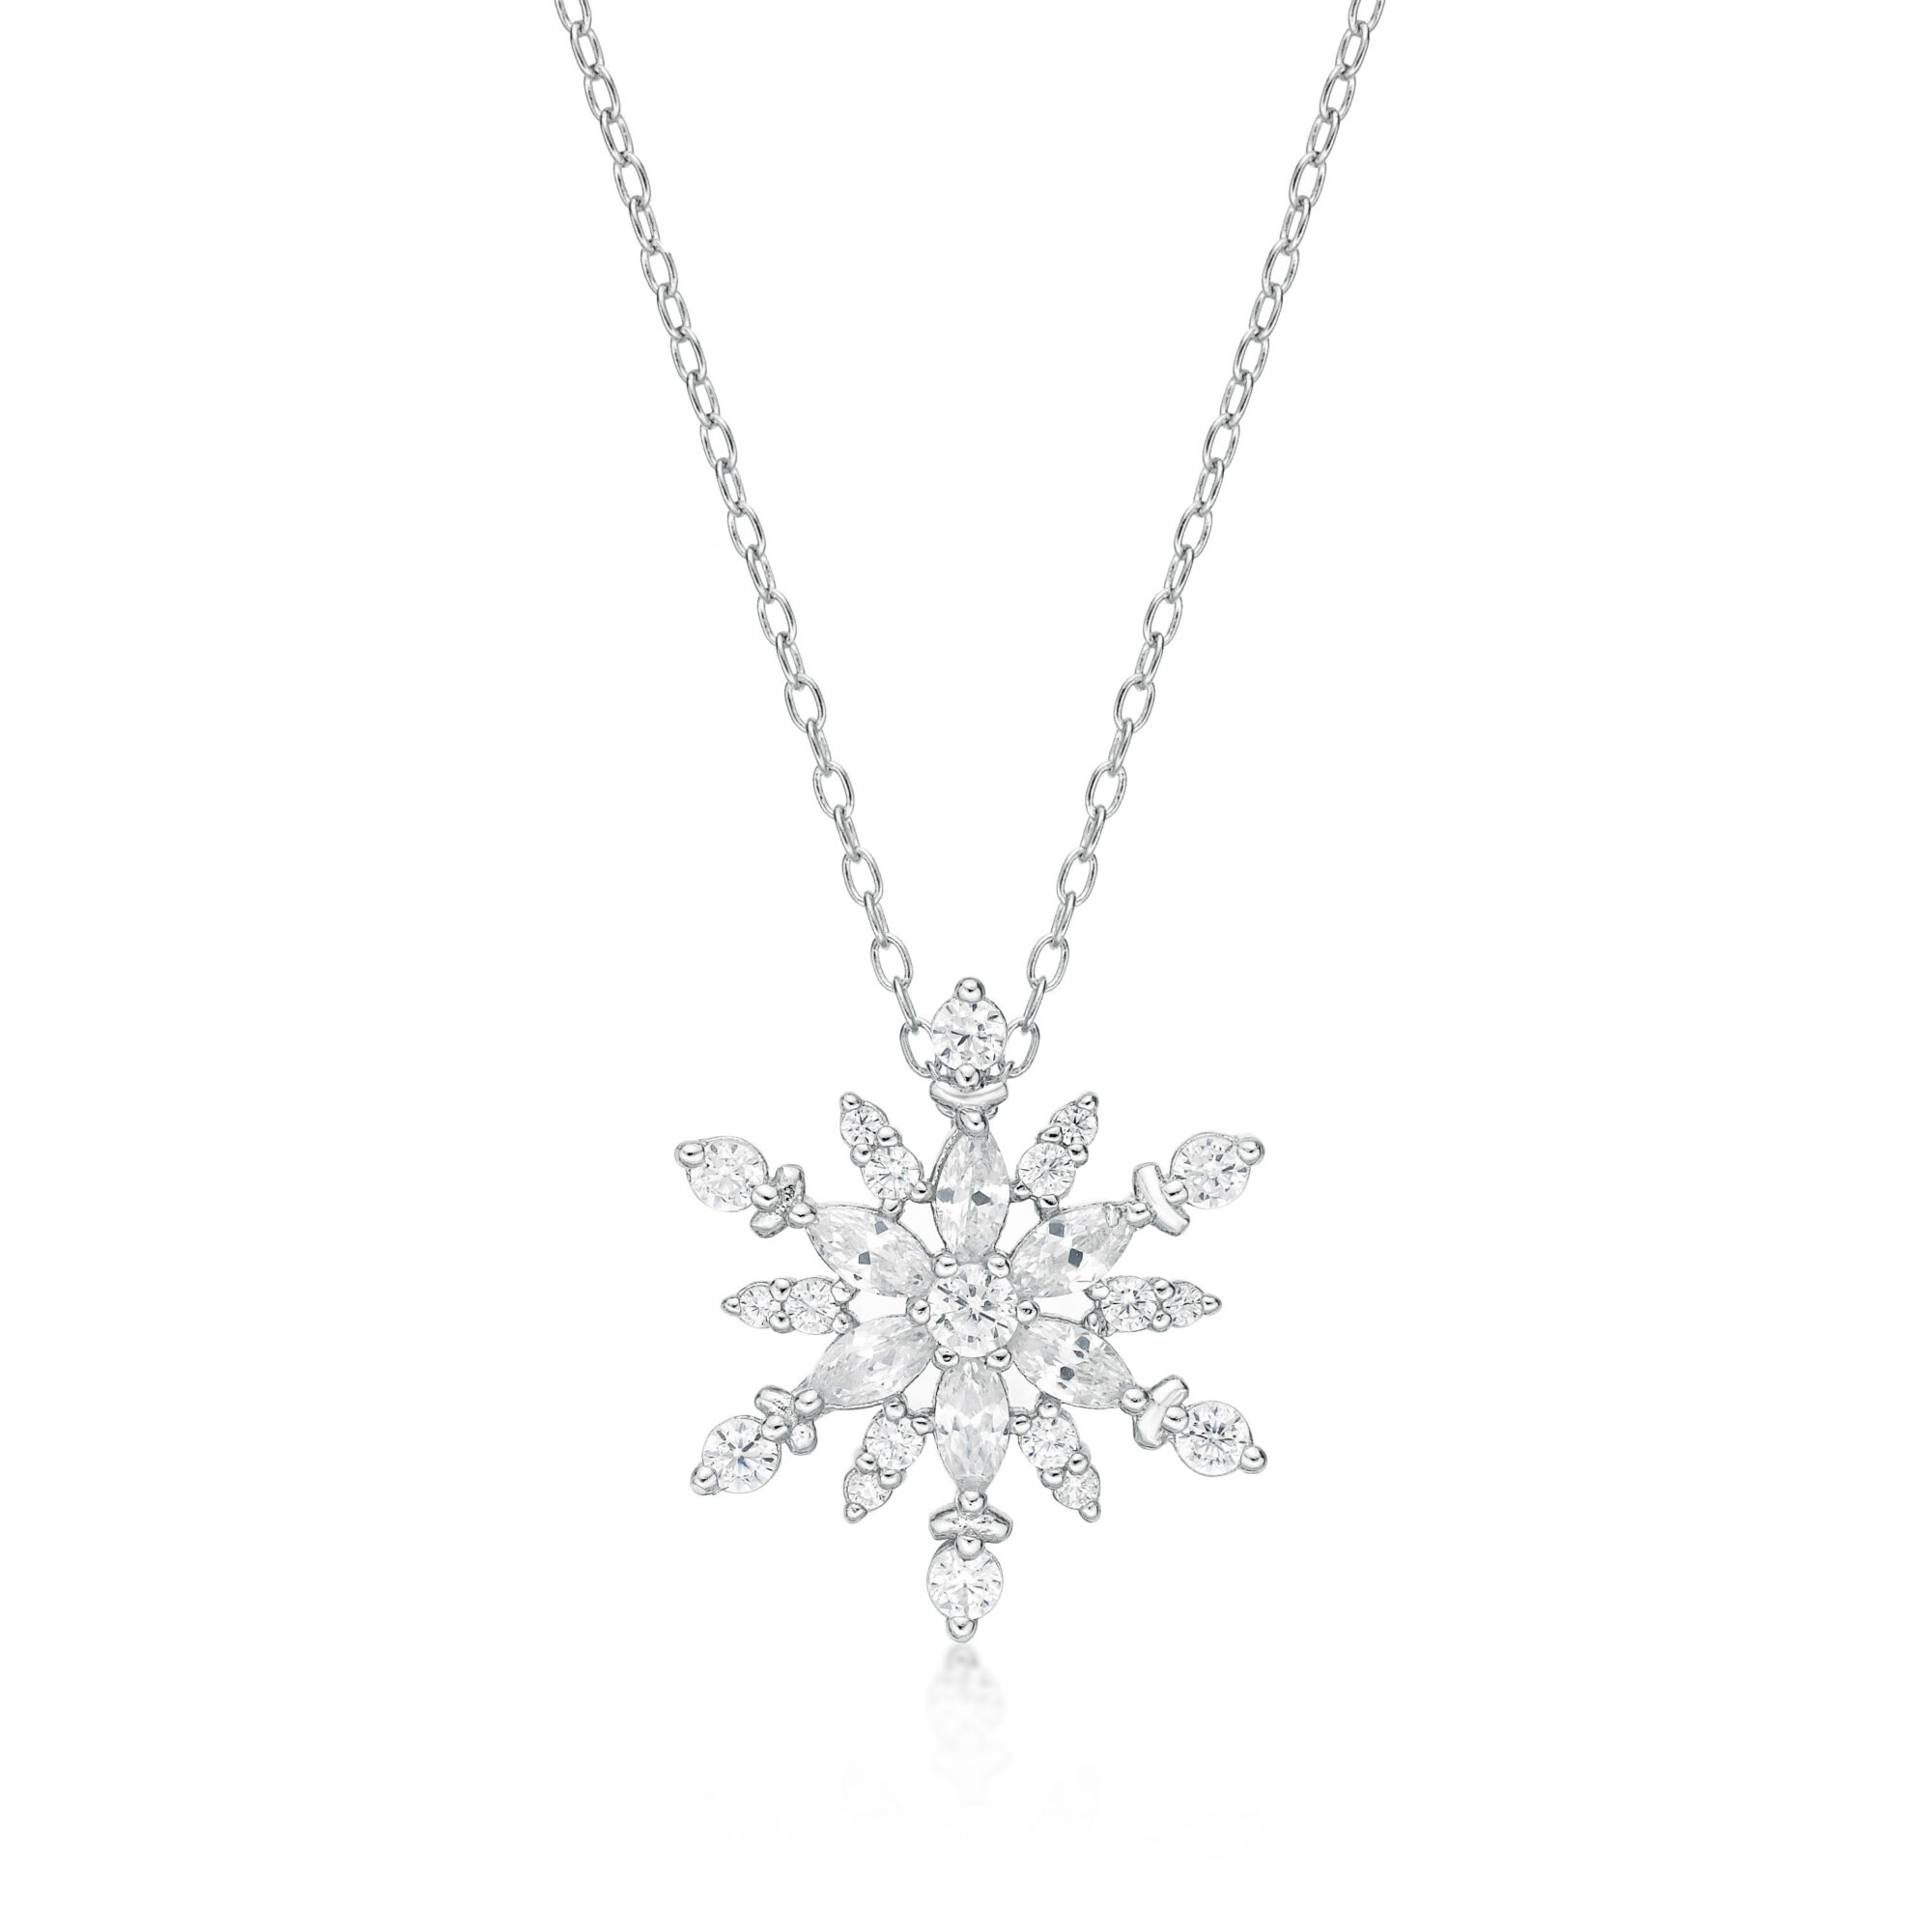 Lavari Jewelers Women's Flurry Snowflake Pendant with Lobster Clasp, Sterling Silver, Cubic Zirconia, 18 Inch Adjustable Chain